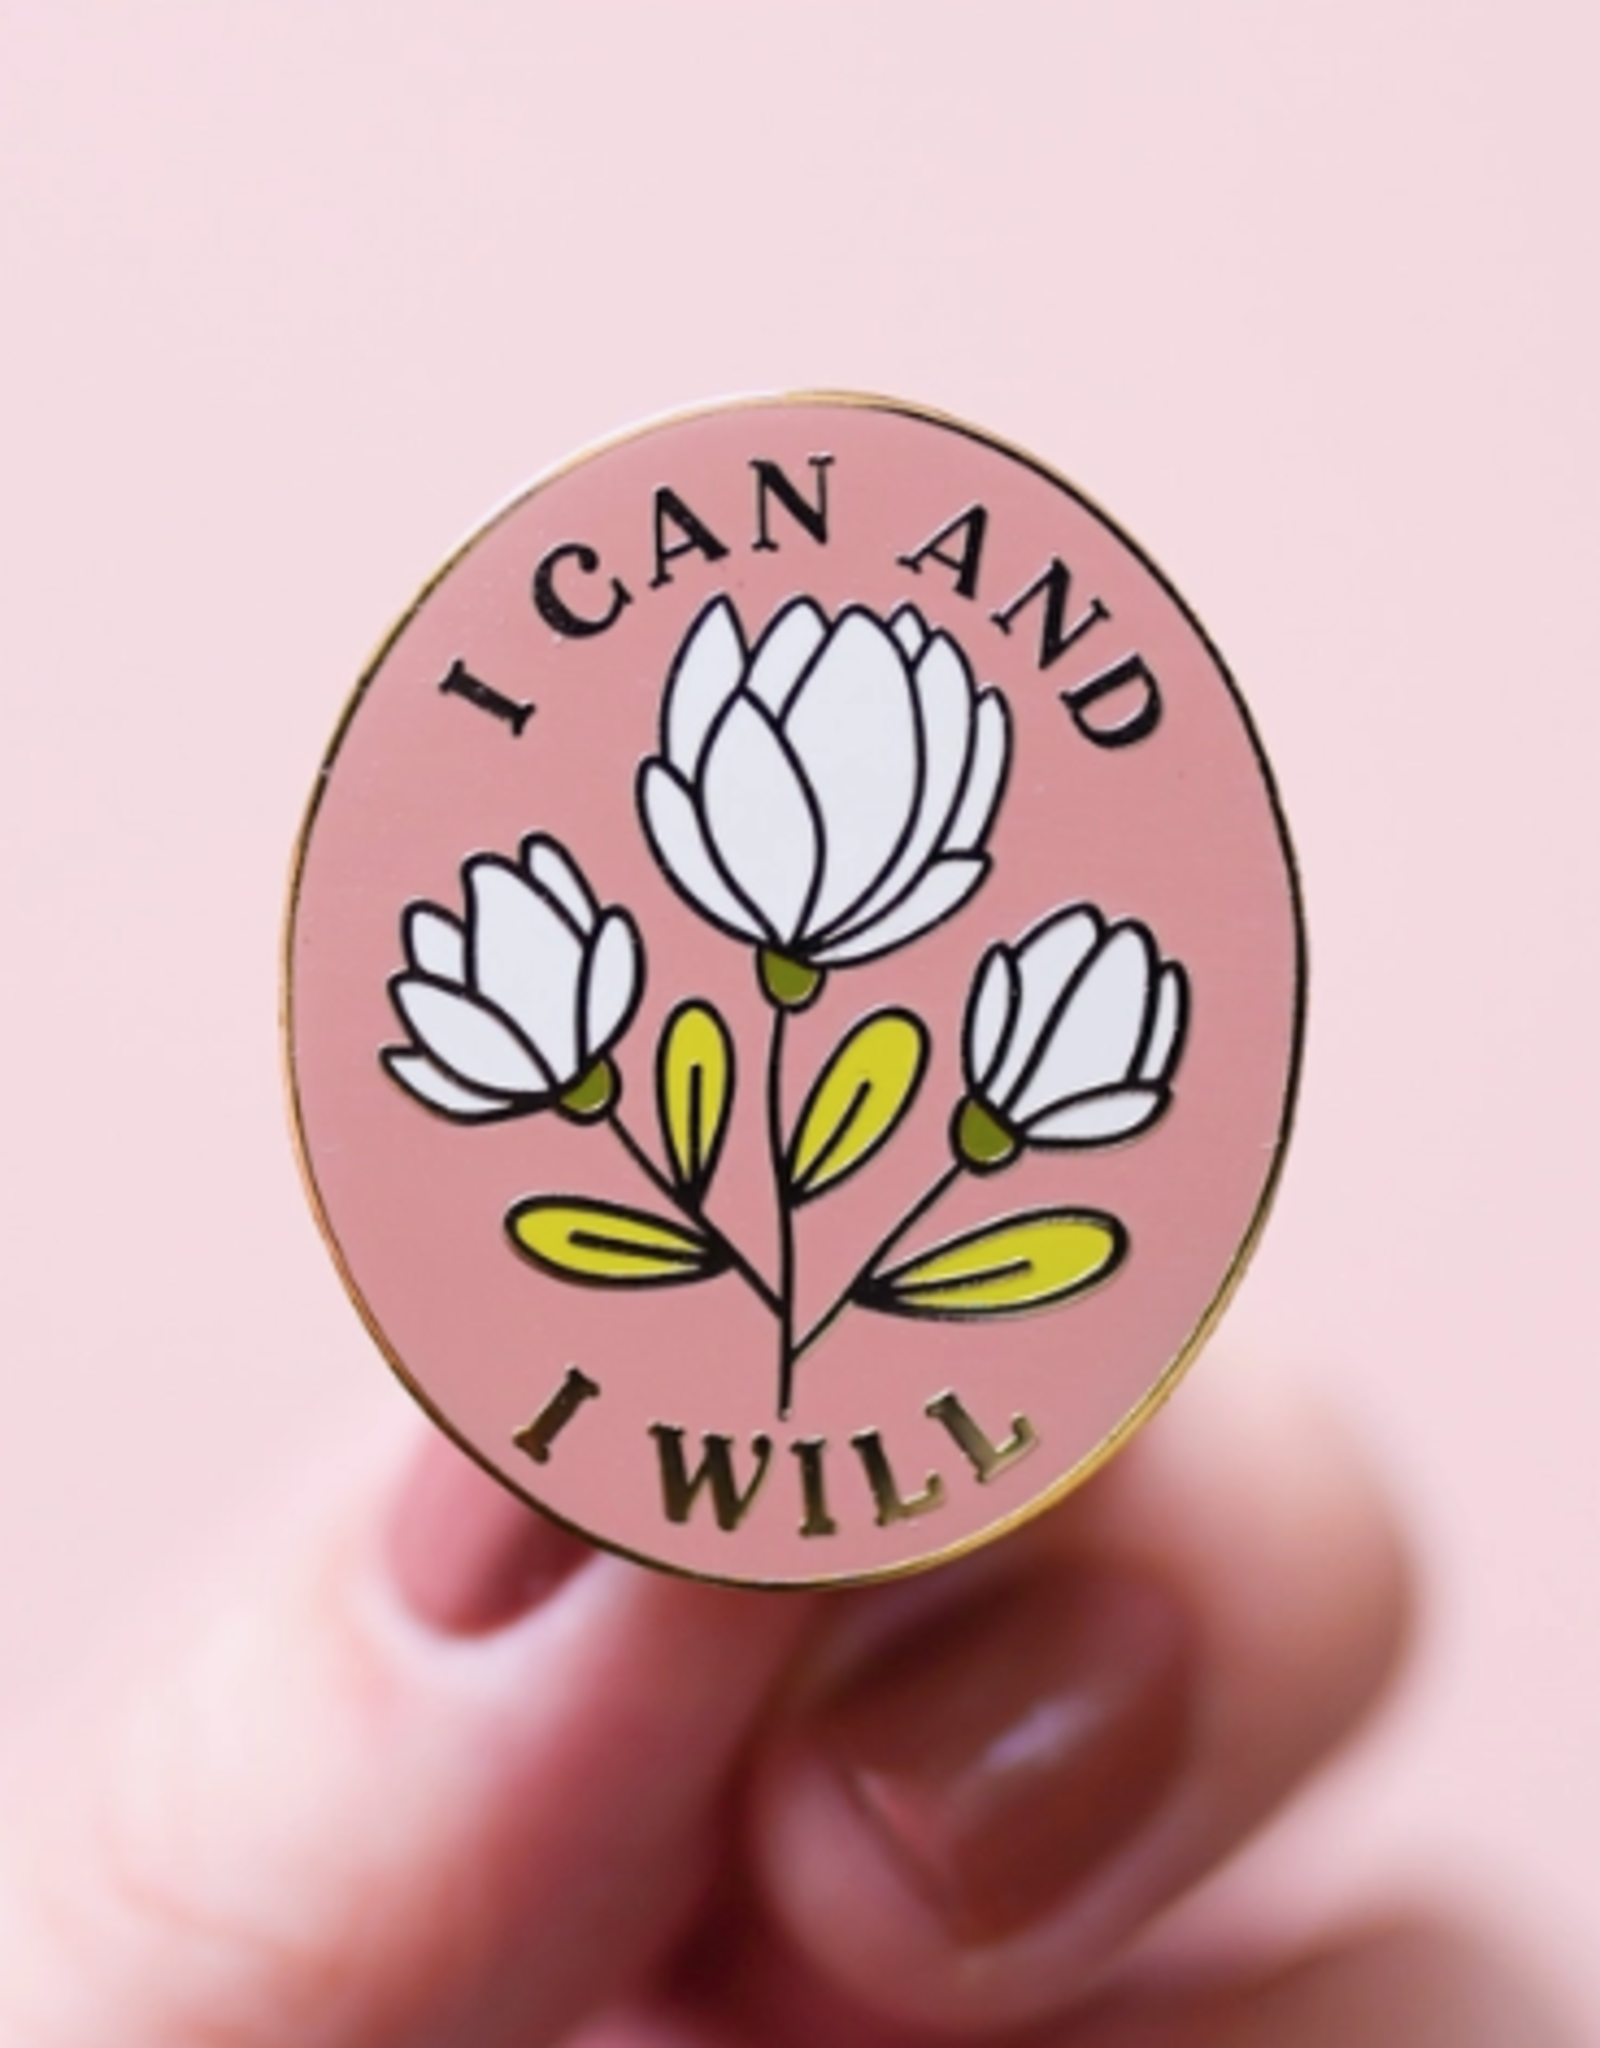 Little Woman Goods I Can & I Will Enamel Pin